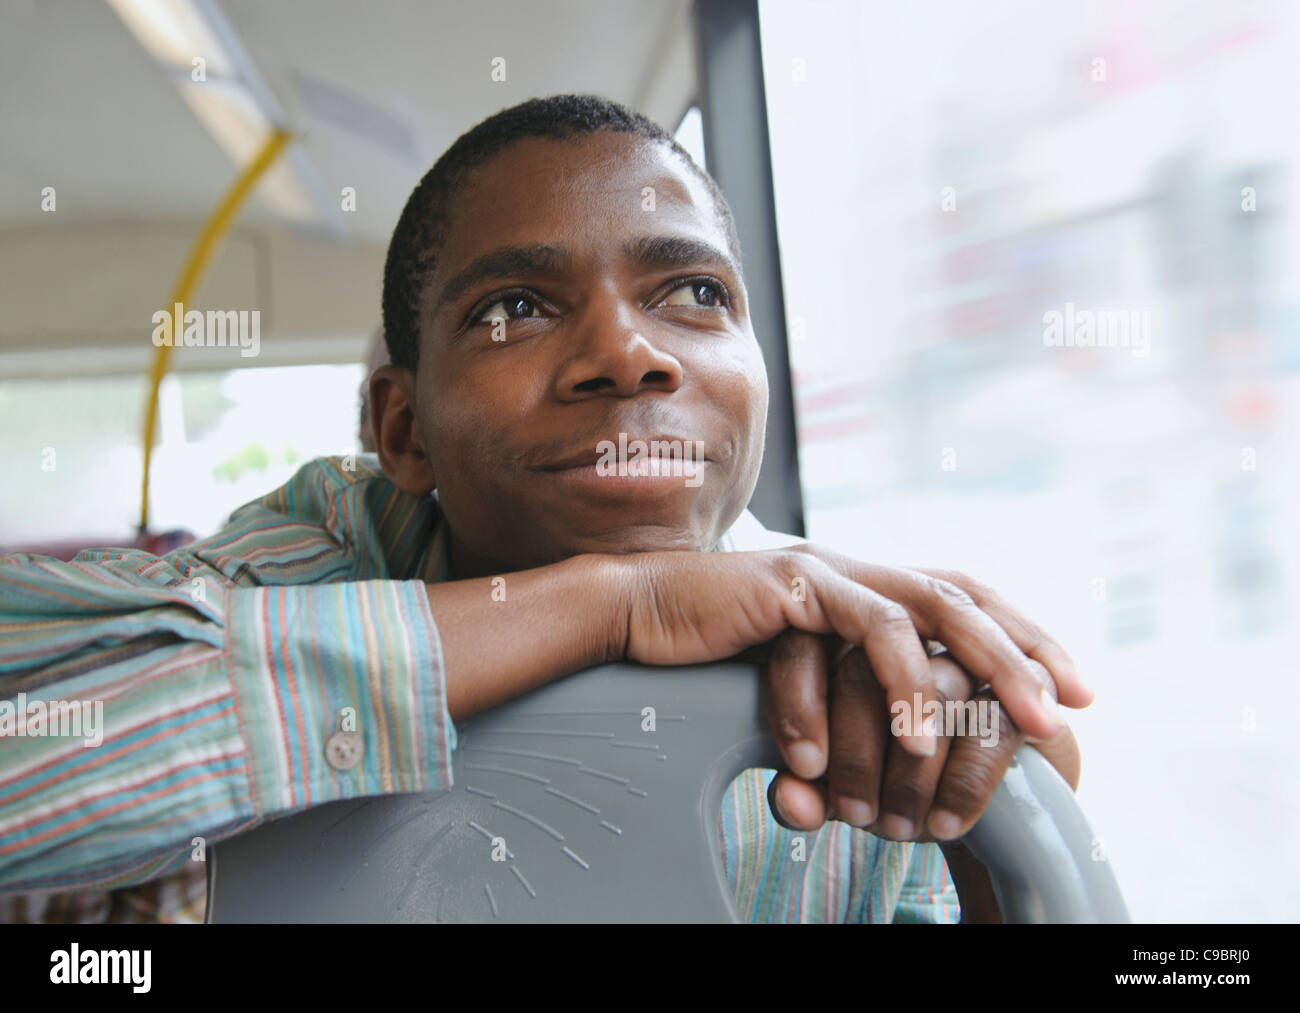 Man daydreaming, on bus, Cape Town, Western Cape Province, South Africa Stock Photo